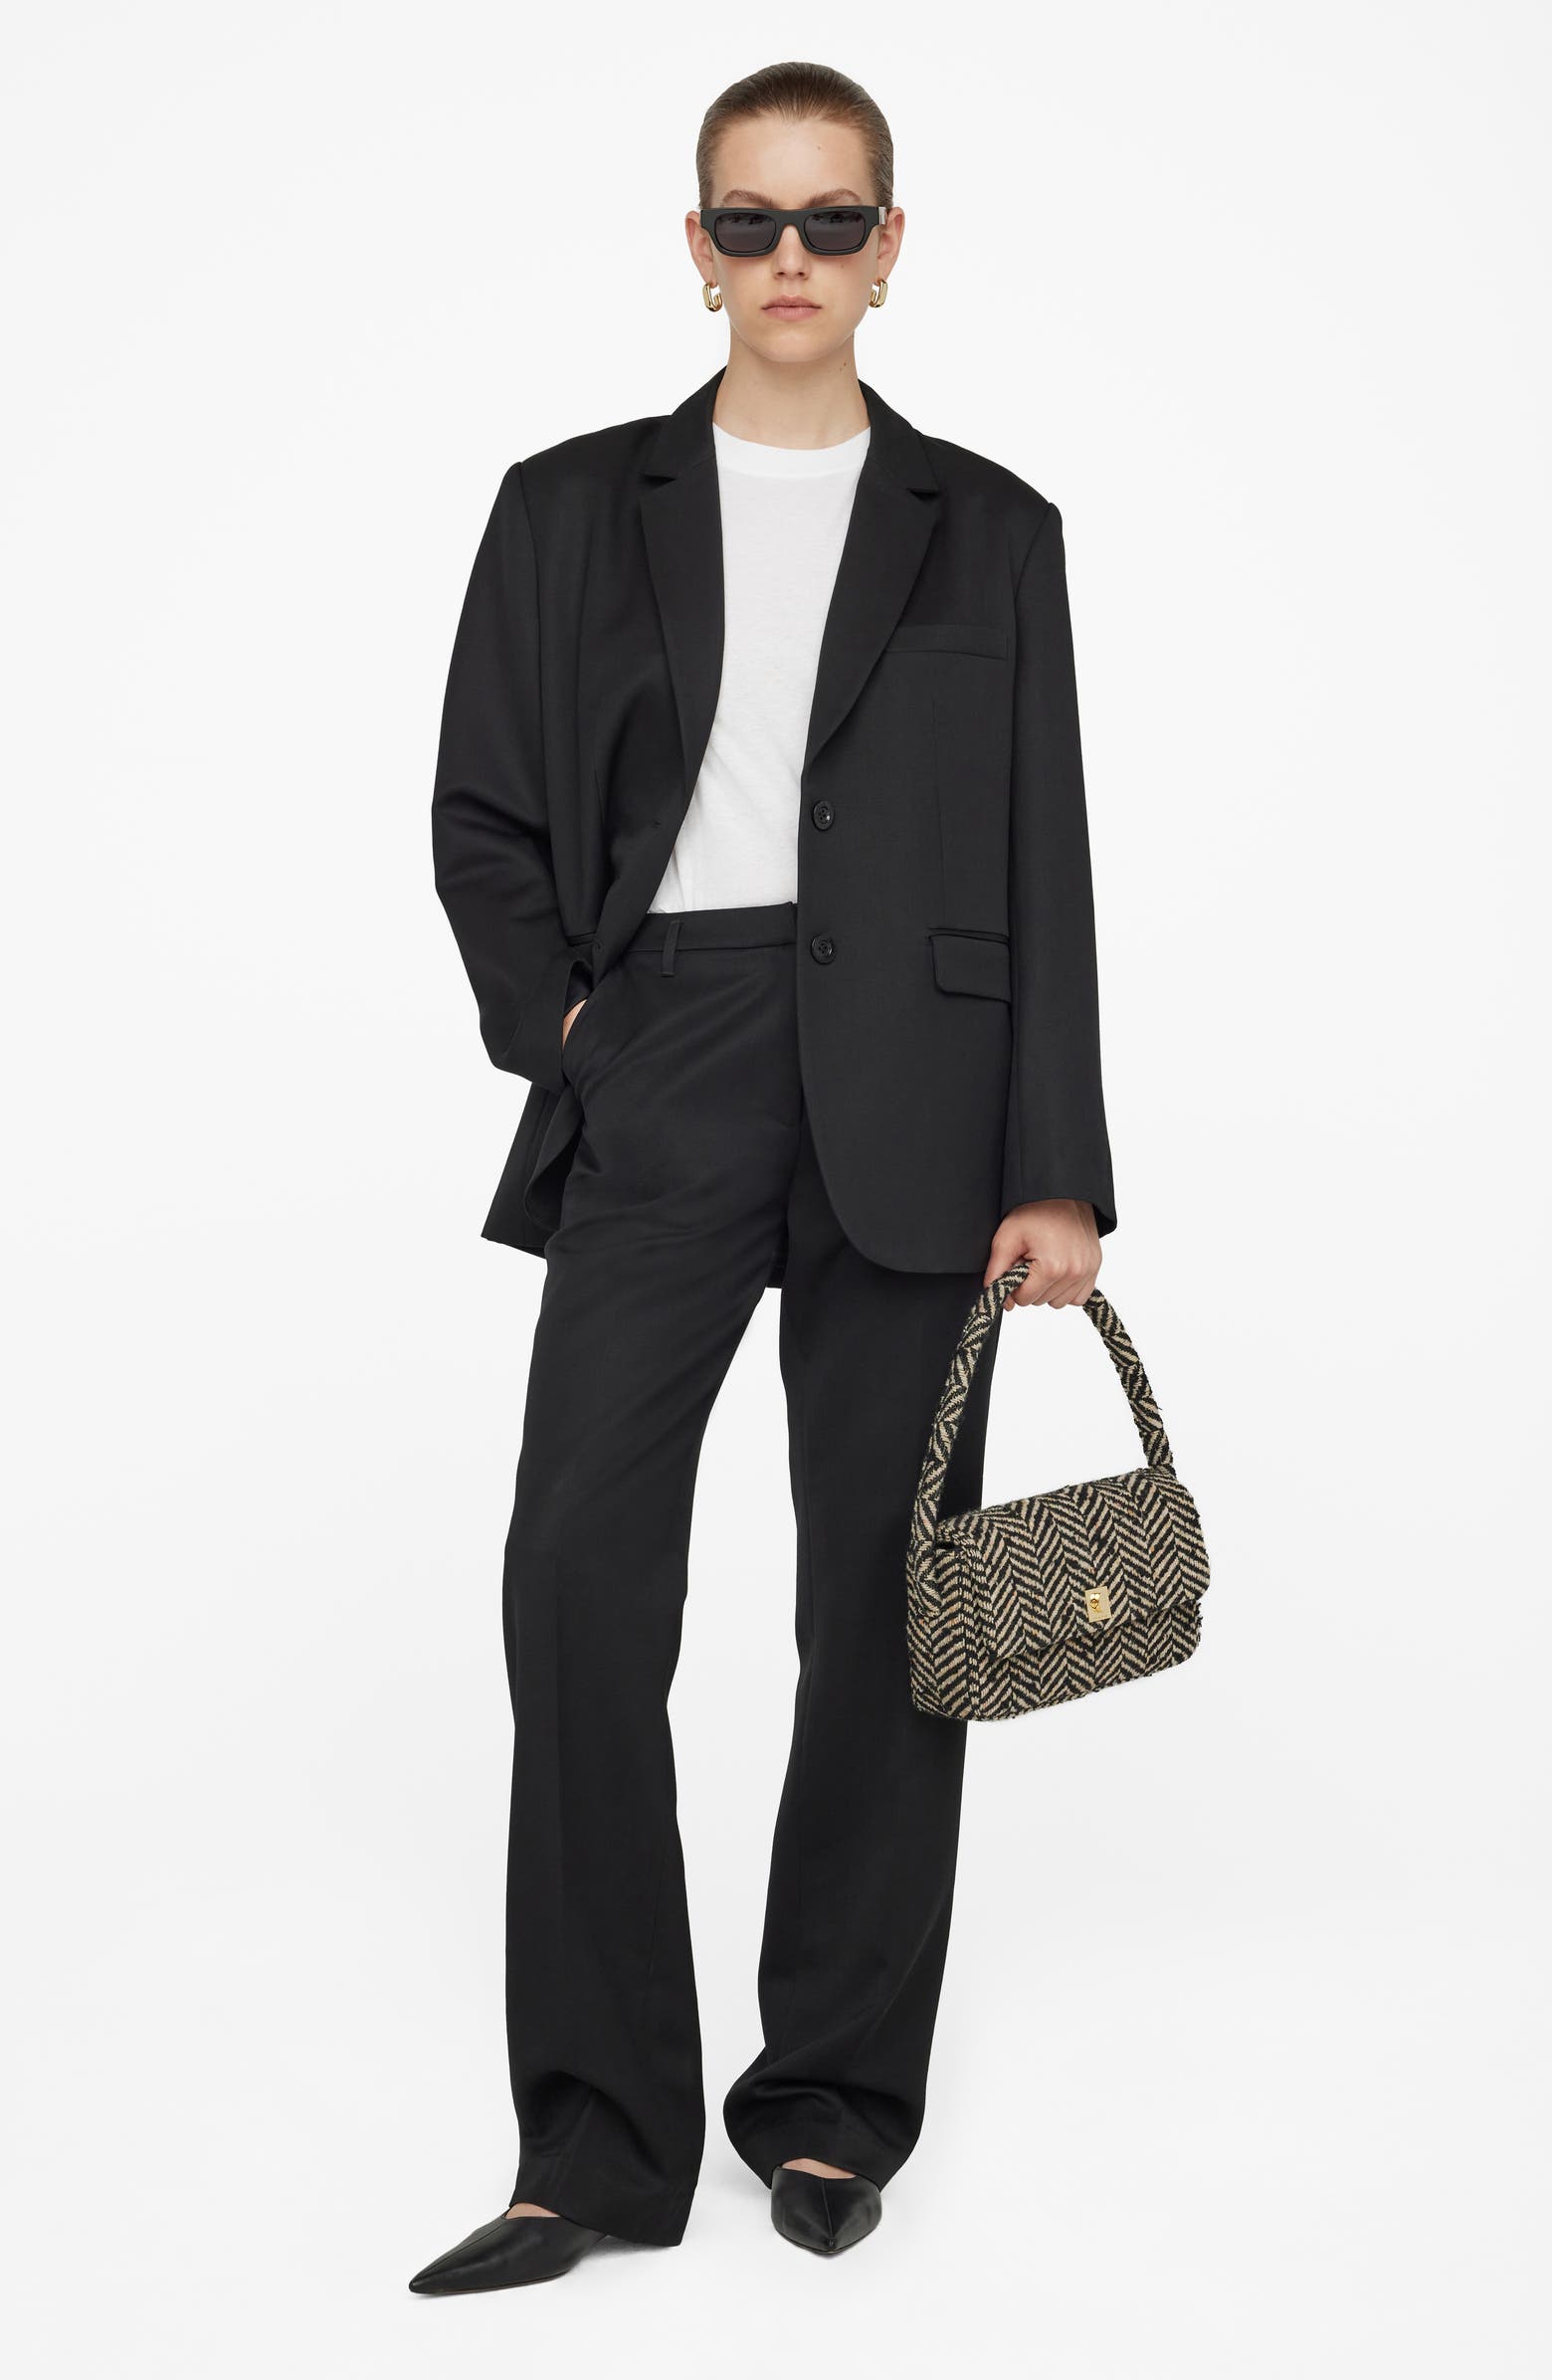 ANINE BING Classic Wool Trousers | Nordstrom